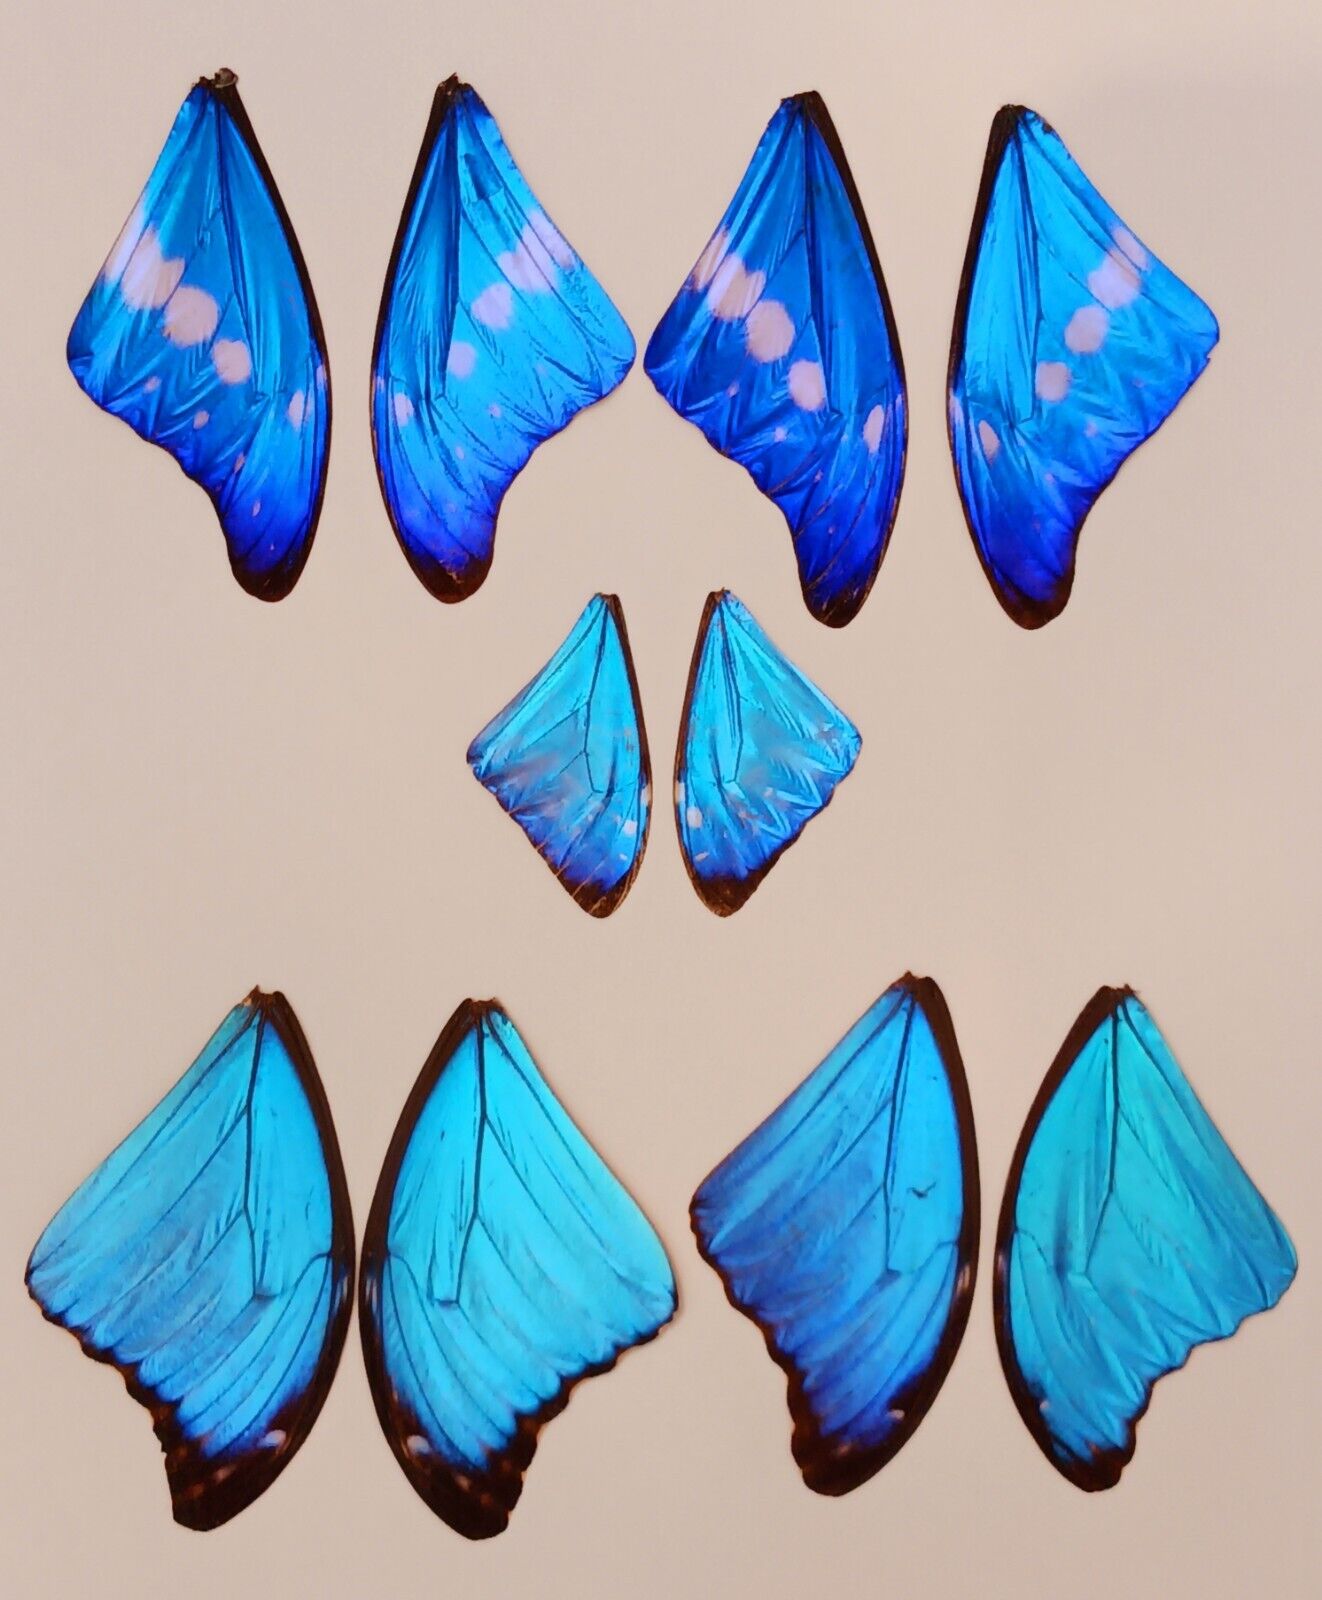 10 PIECES HASSORTED BLUE MORPHO  BUTTERFLY WINGS JEWELRY ARTWORK 